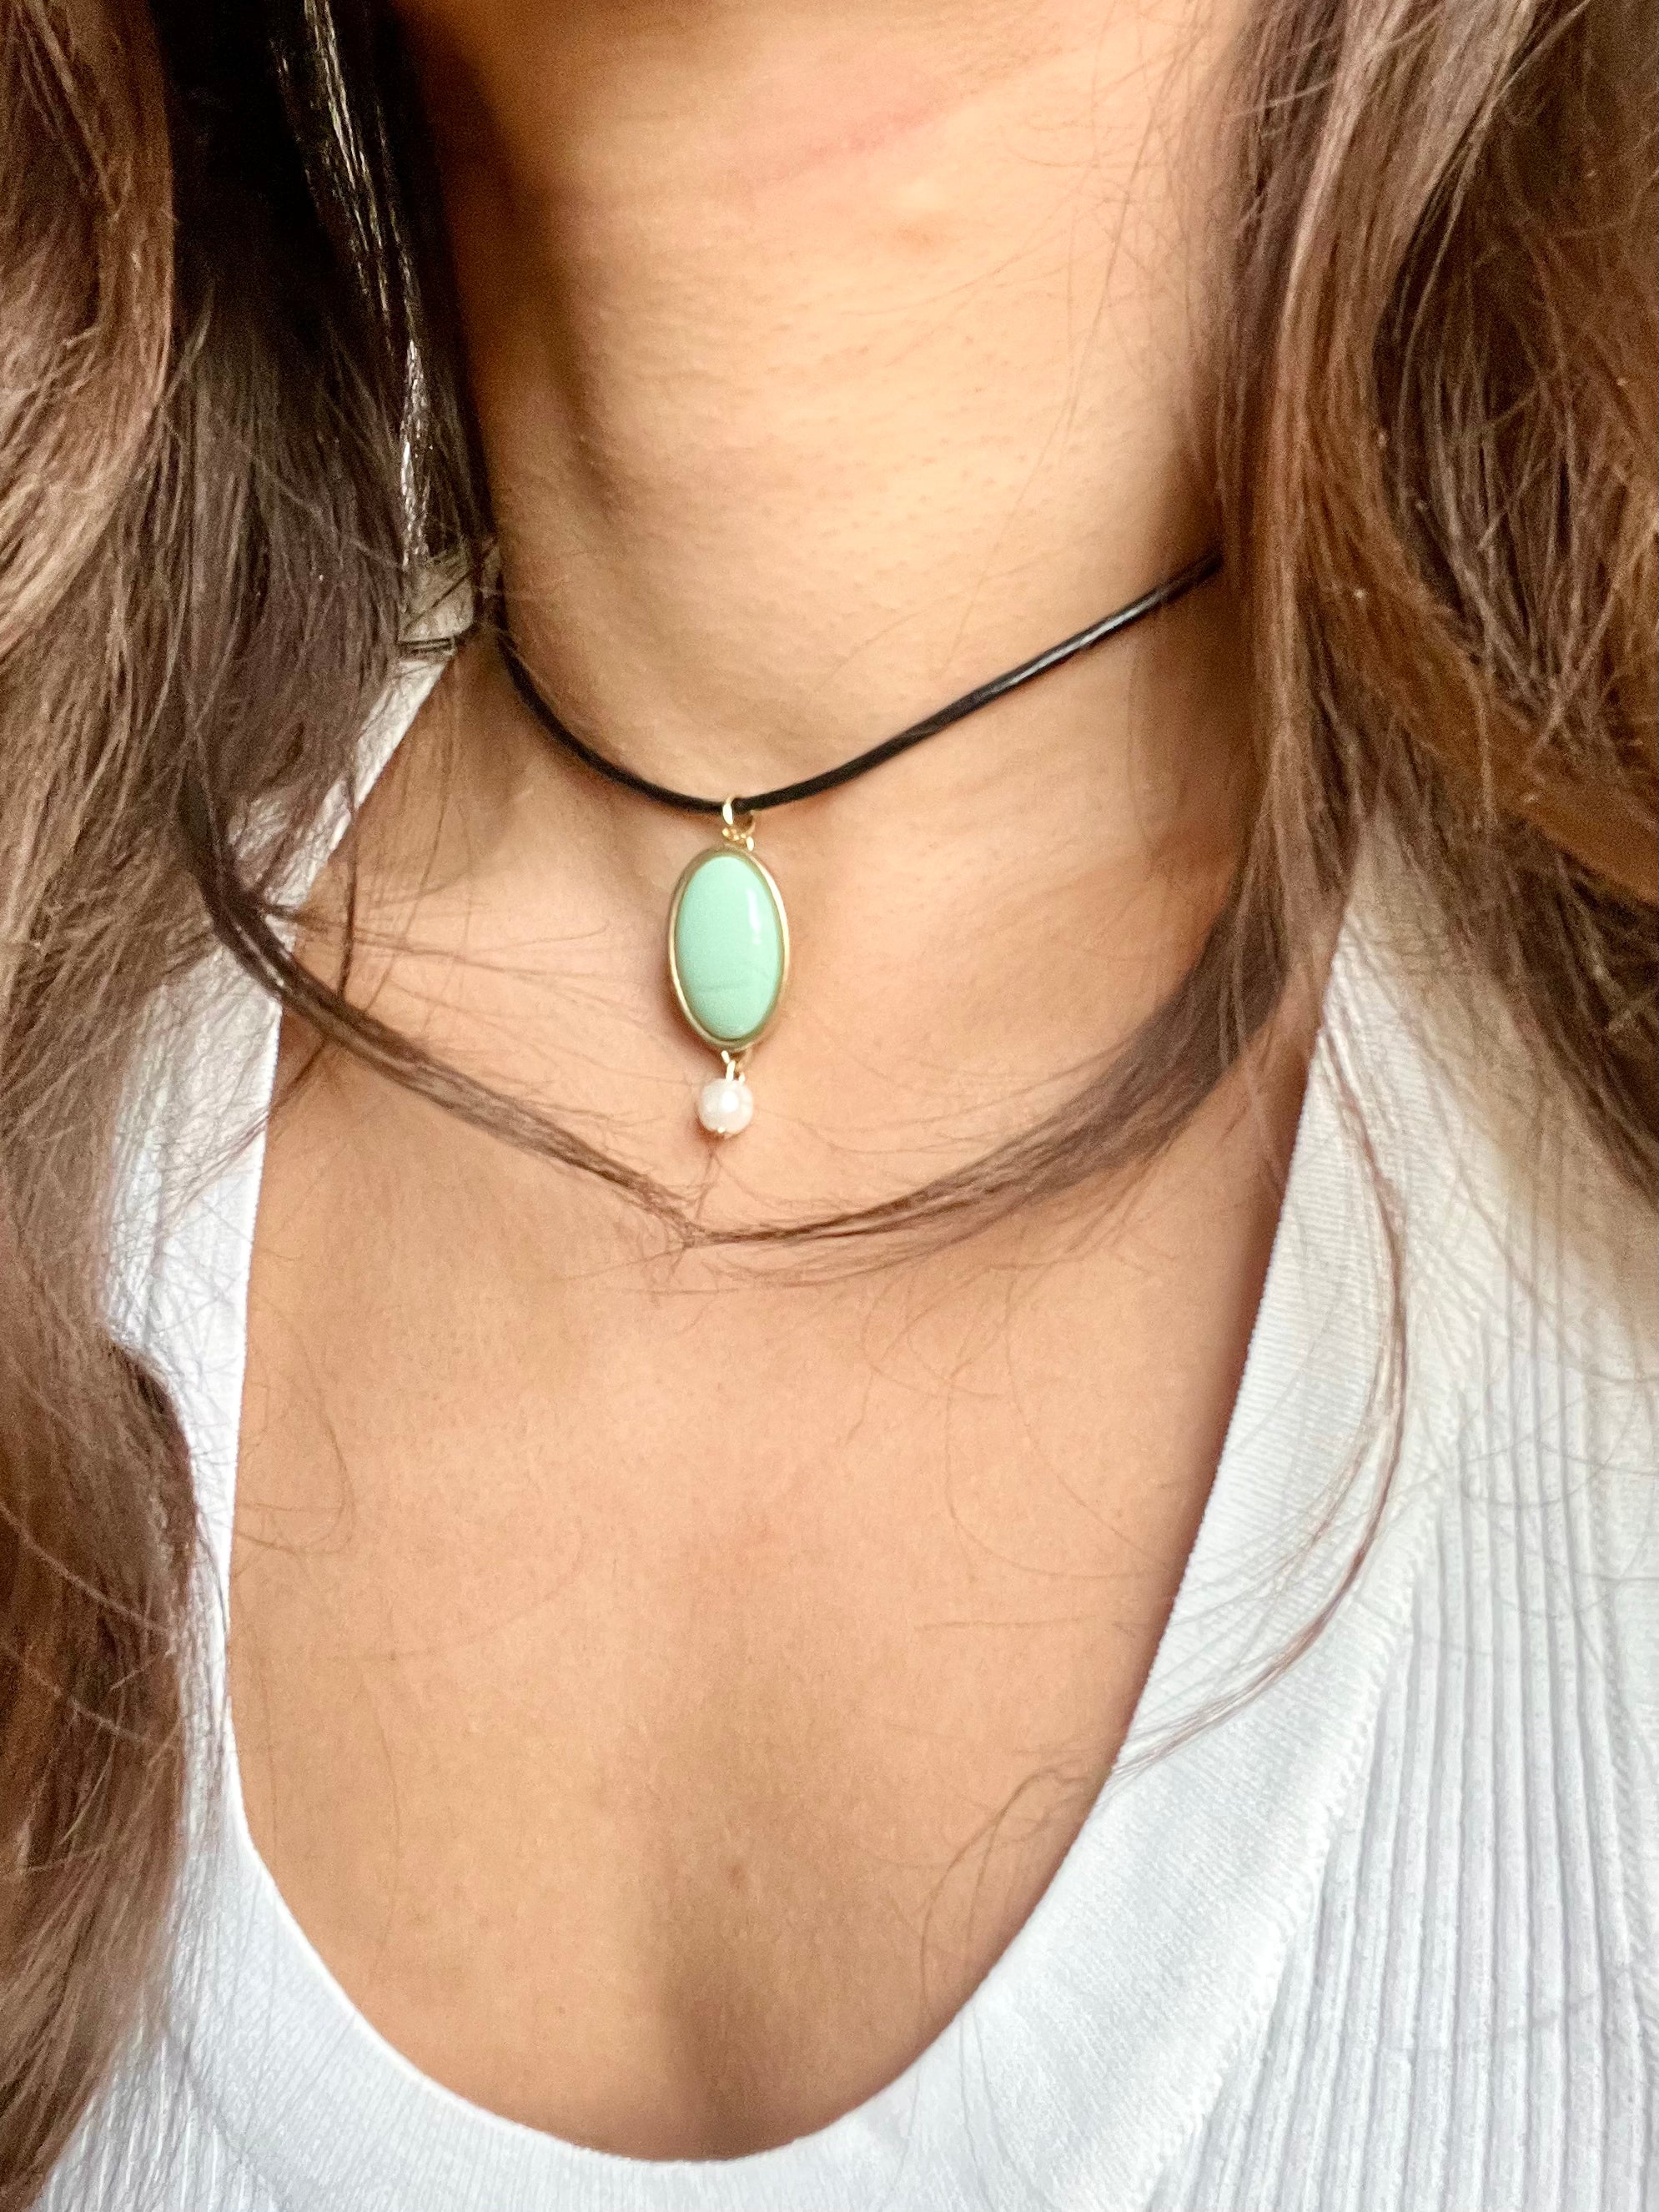 Turquoise Oval Pendant Leather Choker